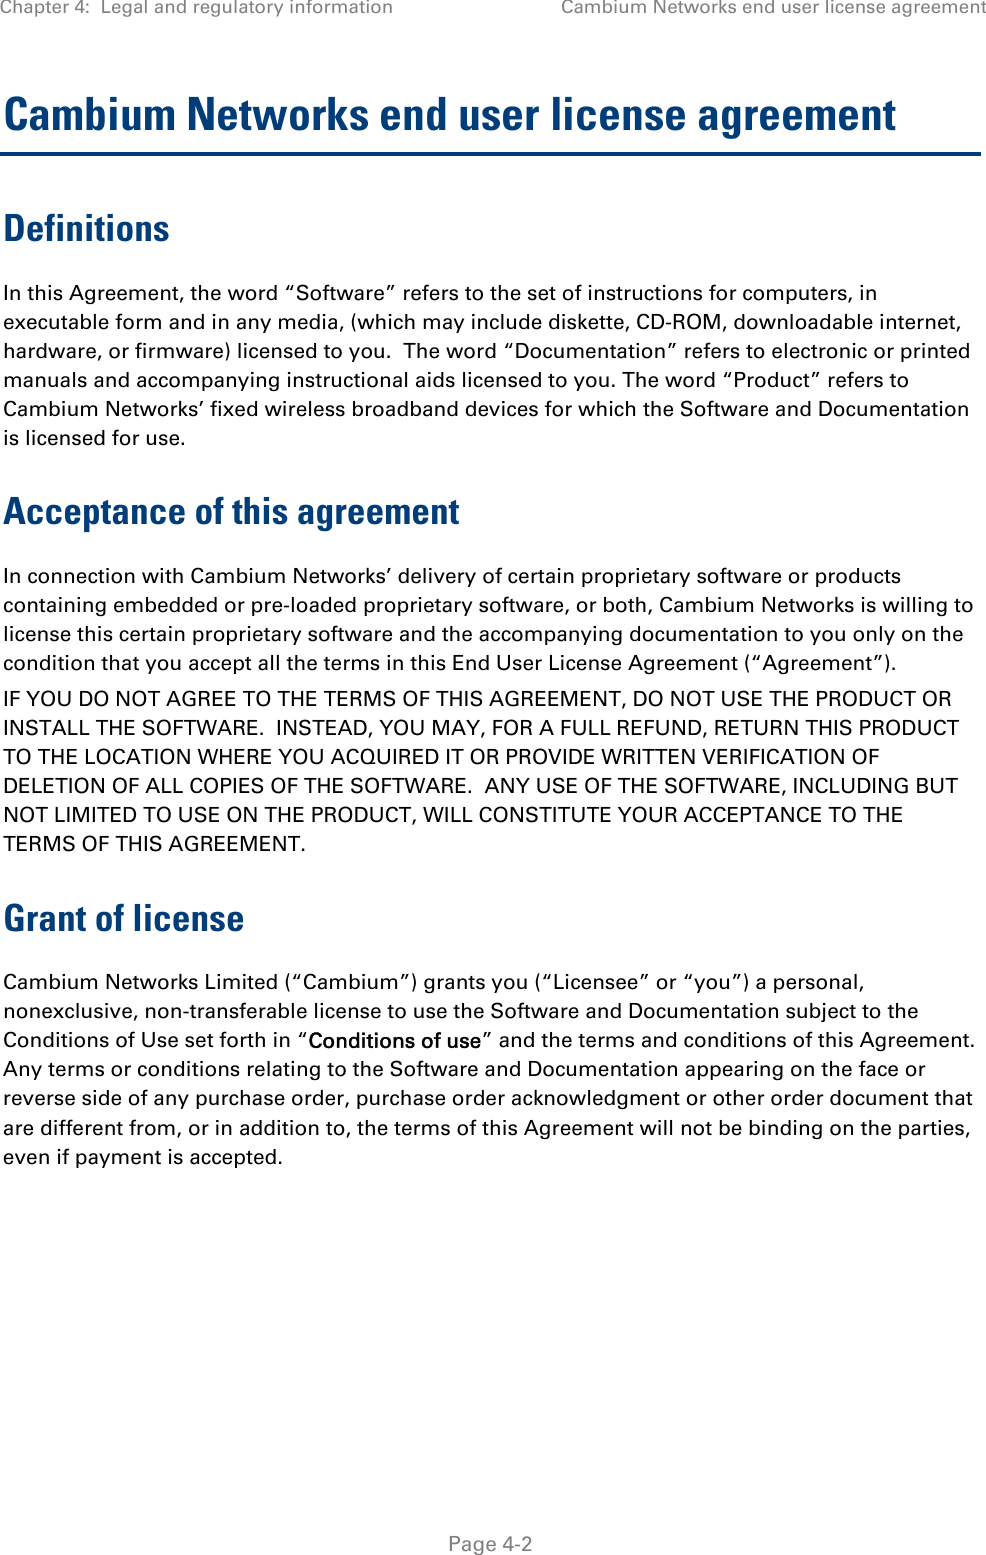 Chapter 4:  Legal and regulatory information  Cambium Networks end user license agreement   Page 4-2 Cambium Networks end user license agreement Definitions In this Agreement, the word “Software” refers to the set of instructions for computers, in executable form and in any media, (which may include diskette, CD-ROM, downloadable internet, hardware, or firmware) licensed to you.  The word “Documentation” refers to electronic or printed manuals and accompanying instructional aids licensed to you. The word “Product” refers to Cambium Networks’ fixed wireless broadband devices for which the Software and Documentation is licensed for use. Acceptance of this agreement In connection with Cambium Networks’ delivery of certain proprietary software or products containing embedded or pre-loaded proprietary software, or both, Cambium Networks is willing to license this certain proprietary software and the accompanying documentation to you only on the condition that you accept all the terms in this End User License Agreement (“Agreement”). IF YOU DO NOT AGREE TO THE TERMS OF THIS AGREEMENT, DO NOT USE THE PRODUCT OR INSTALL THE SOFTWARE.  INSTEAD, YOU MAY, FOR A FULL REFUND, RETURN THIS PRODUCT TO THE LOCATION WHERE YOU ACQUIRED IT OR PROVIDE WRITTEN VERIFICATION OF DELETION OF ALL COPIES OF THE SOFTWARE.  ANY USE OF THE SOFTWARE, INCLUDING BUT NOT LIMITED TO USE ON THE PRODUCT, WILL CONSTITUTE YOUR ACCEPTANCE TO THE TERMS OF THIS AGREEMENT.  Grant of license Cambium Networks Limited (“Cambium”) grants you (“Licensee” or “you”) a personal, nonexclusive, non-transferable license to use the Software and Documentation subject to the Conditions of Use set forth in “Conditions of use” and the terms and conditions of this Agreement.  Any terms or conditions relating to the Software and Documentation appearing on the face or reverse side of any purchase order, purchase order acknowledgment or other order document that are different from, or in addition to, the terms of this Agreement will not be binding on the parties, even if payment is accepted. 